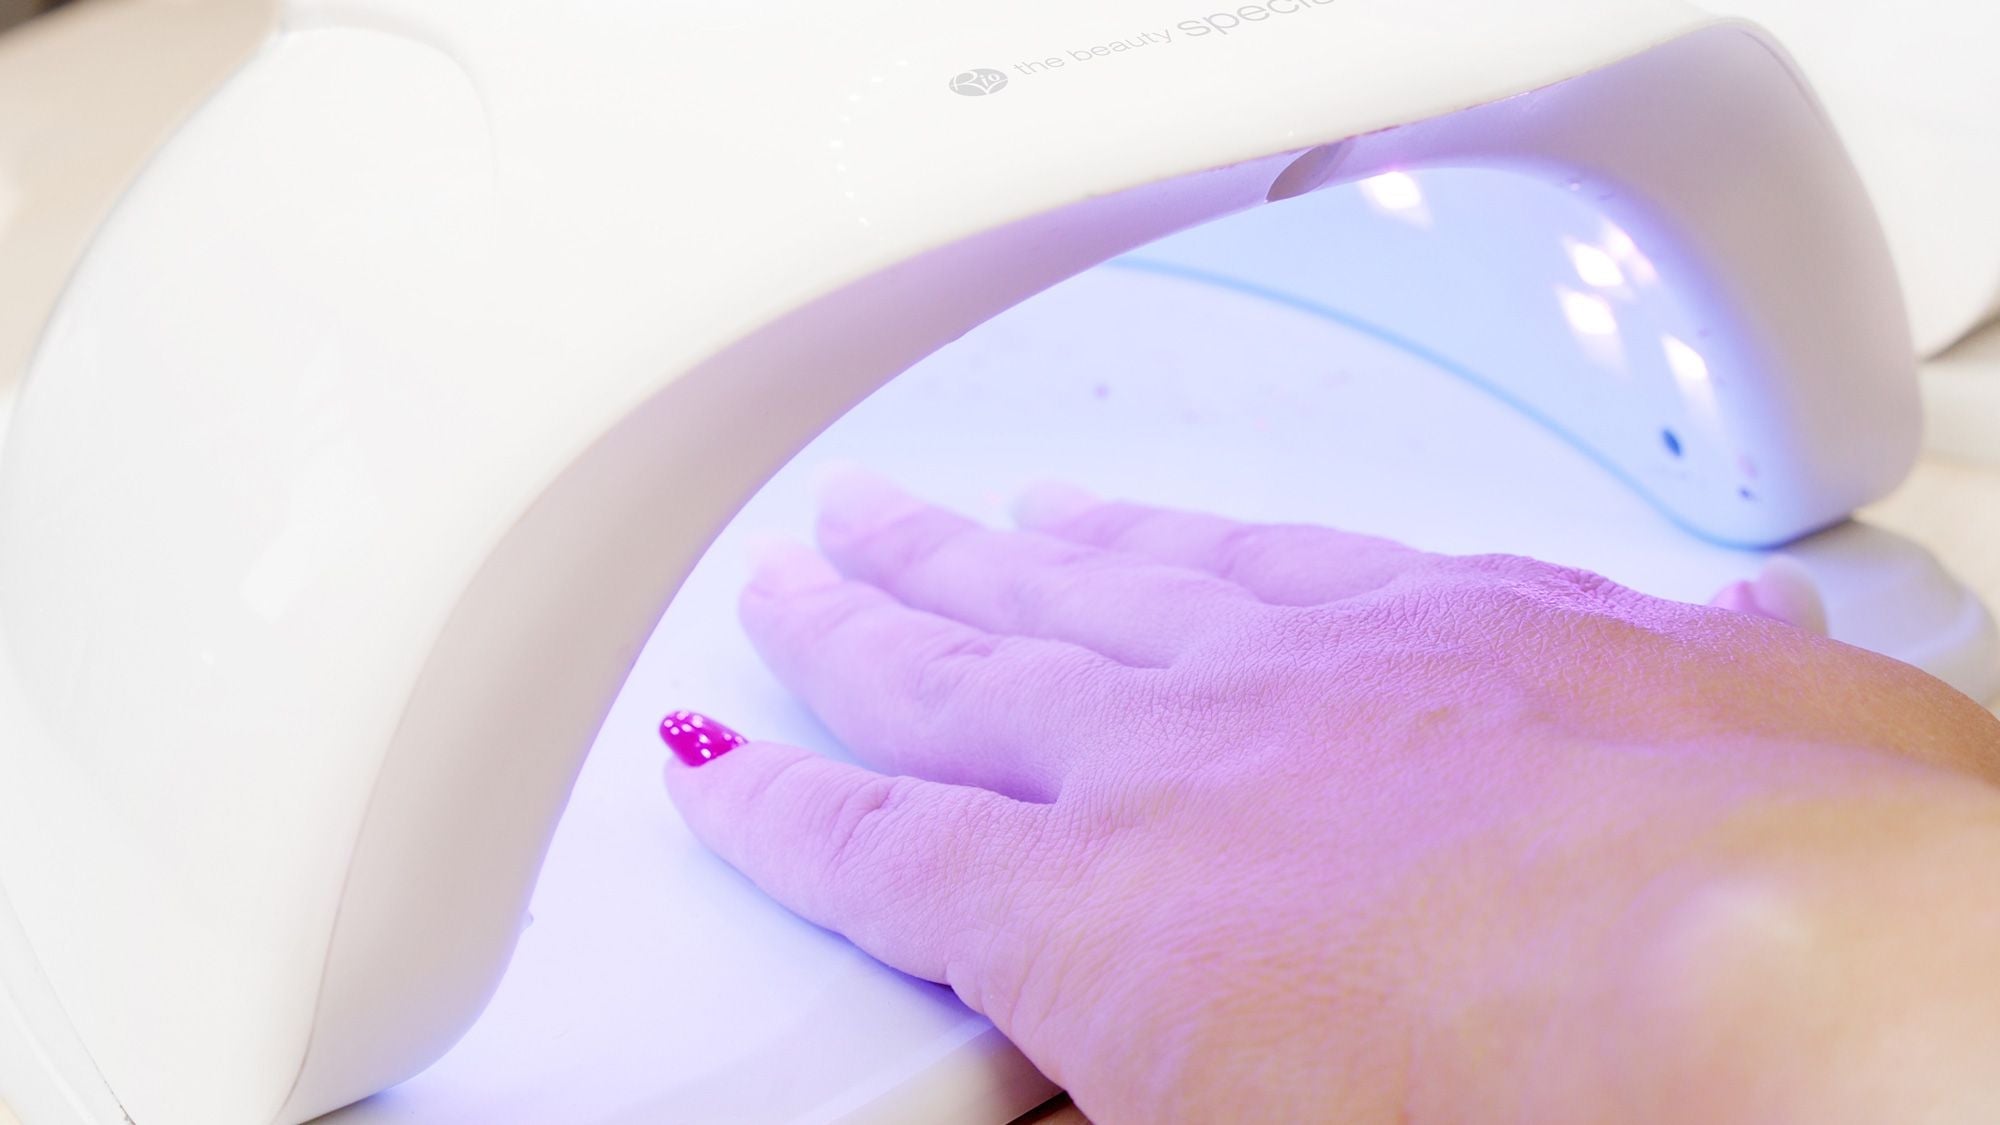 nails under UV Nail lamp 36w with dual LED with UV light curing gel manicure